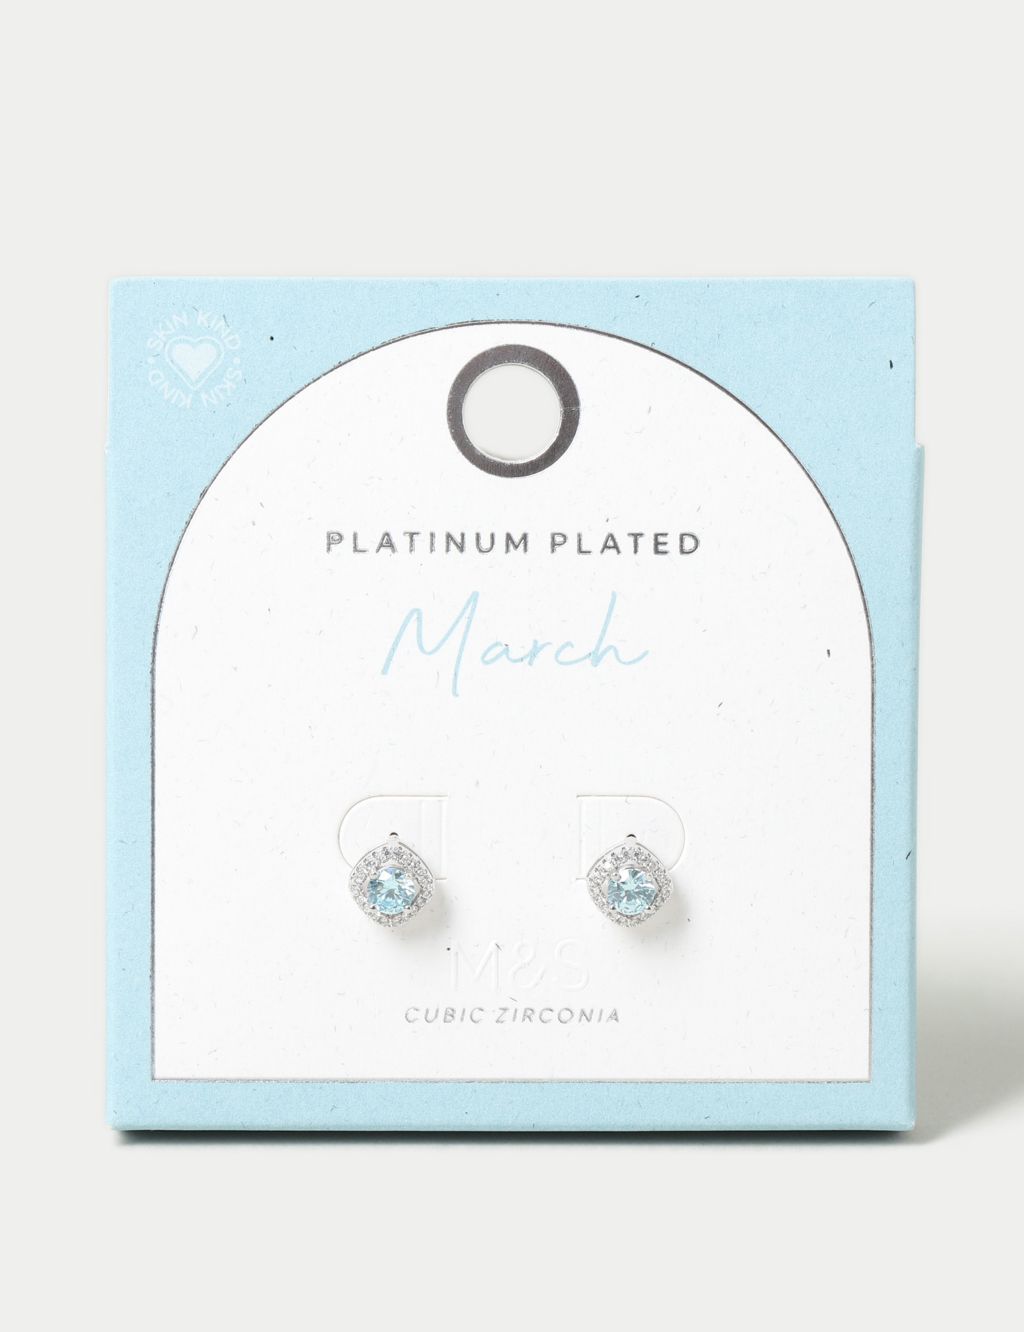 Platinum Plated Cubic Zirconia March Birthstone Stud Earring image 1